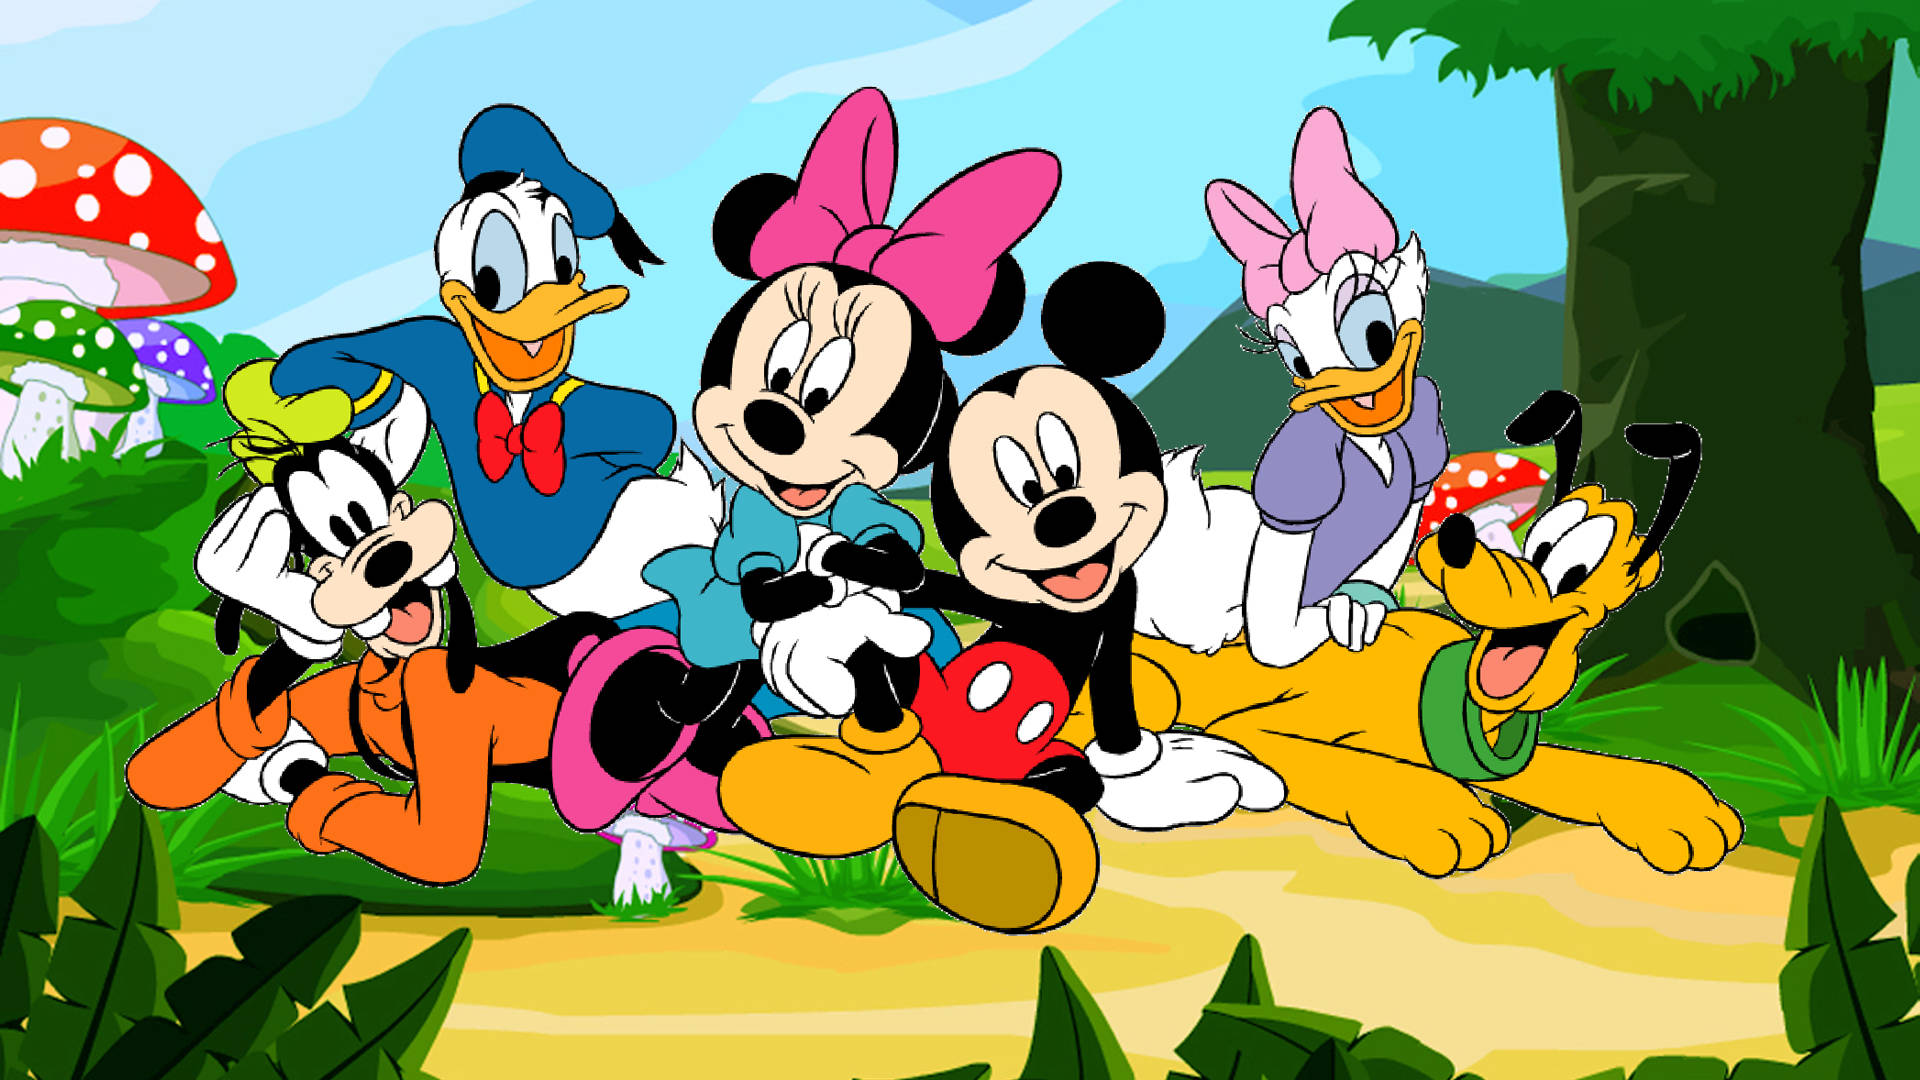 Disney 1920x1080 Hd Mickey Mouse Cast In Forest